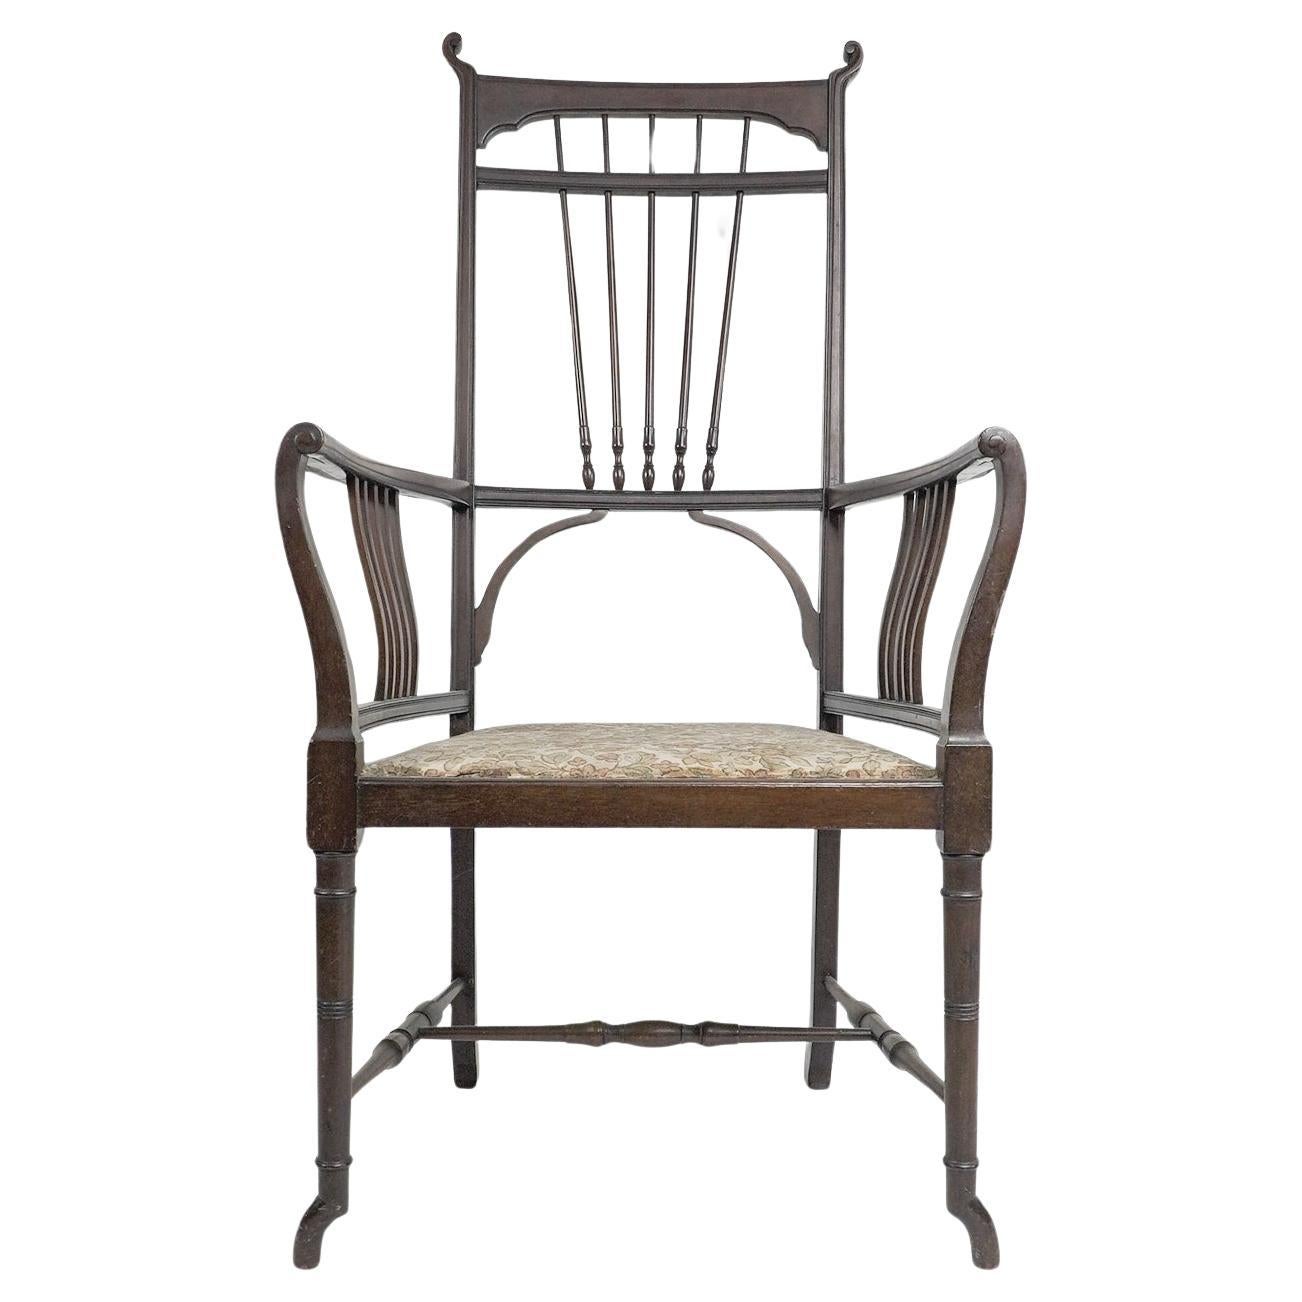 Henry W Batley attr. An Aesthetic Movement walnut armchair with sinuous touches. For Sale